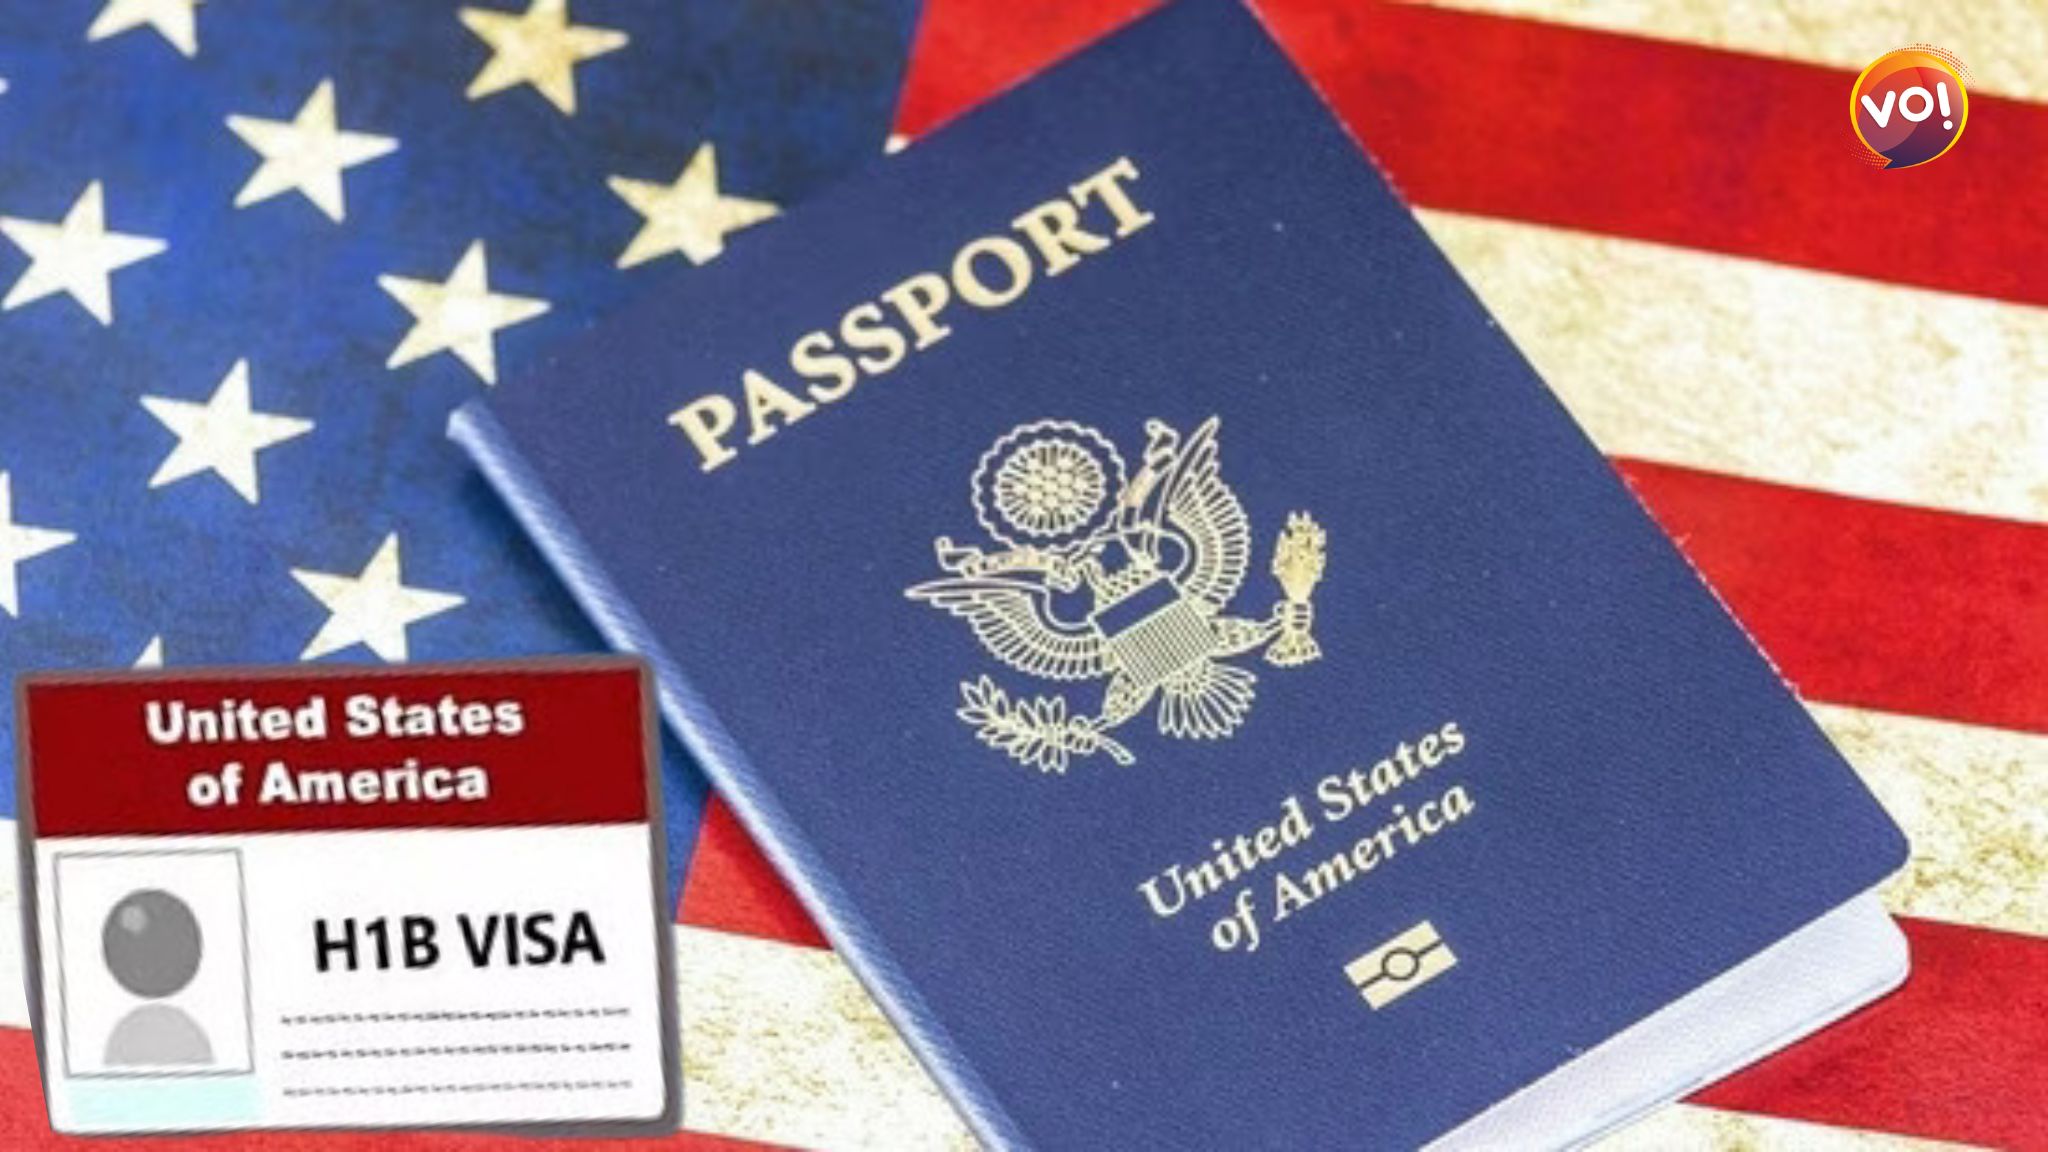 H-1B Visa Application Process To Start On March 6: Reports